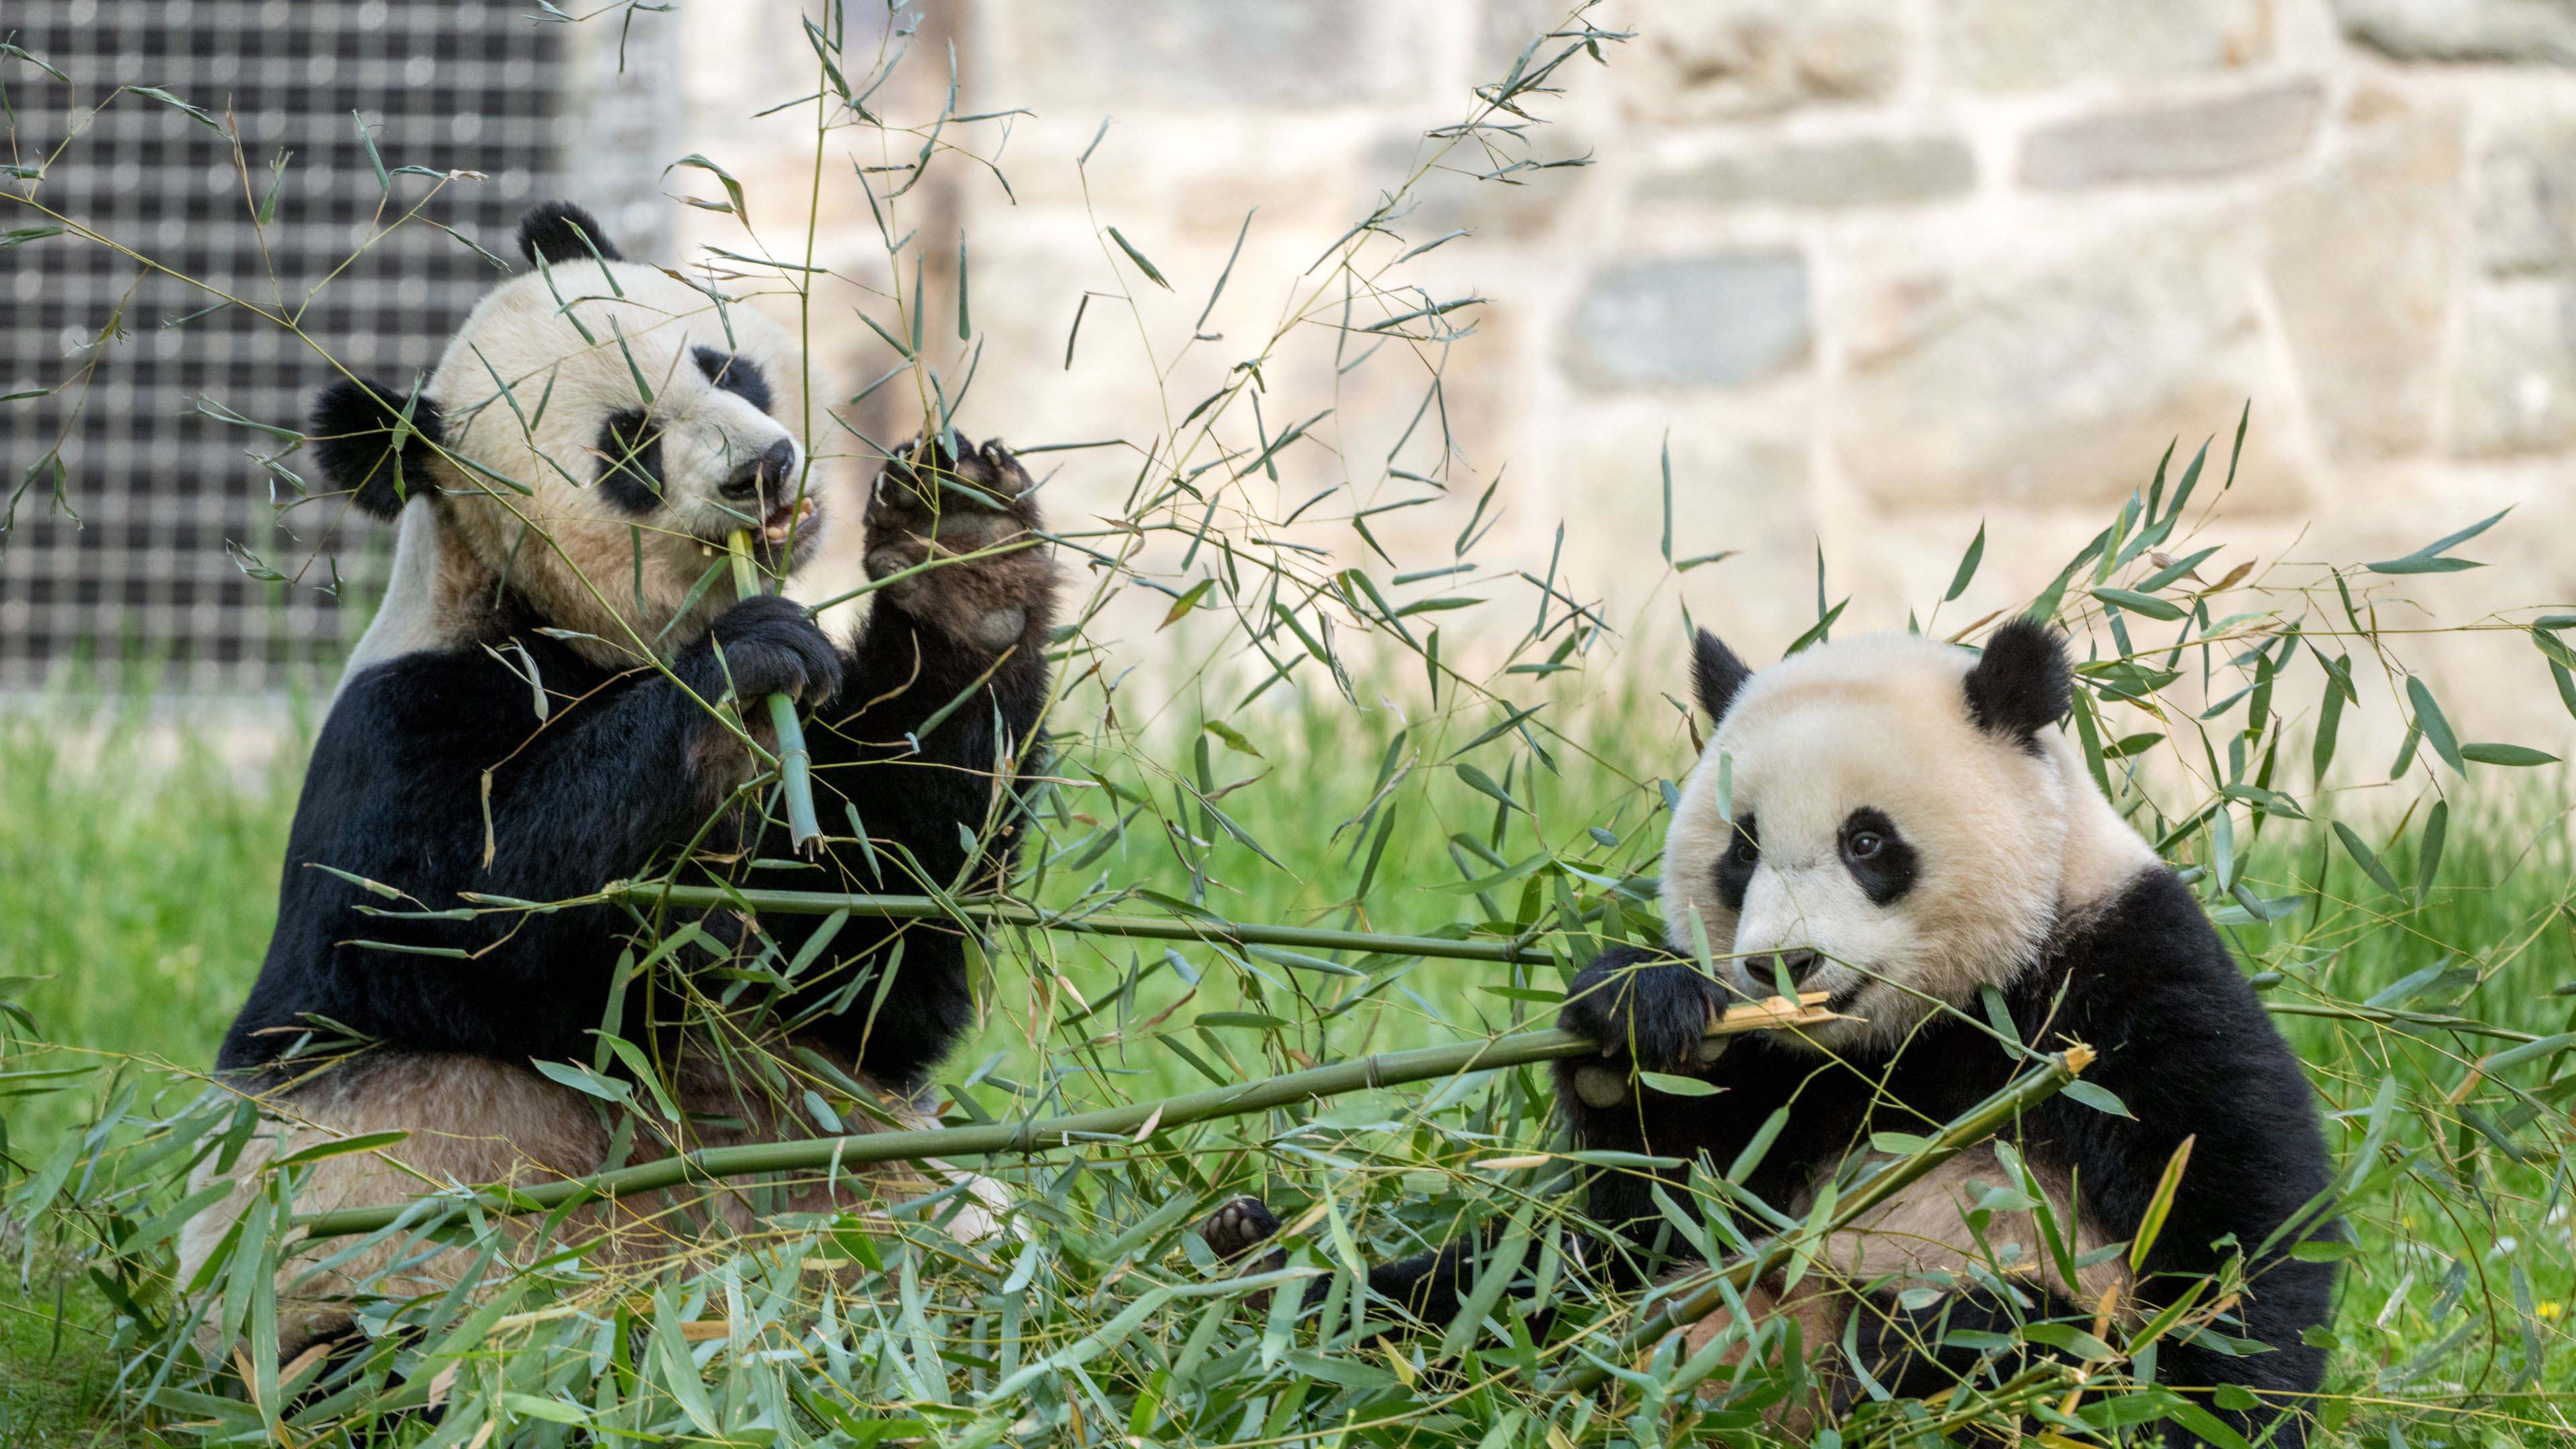 Two pandas eating leaves off a branch